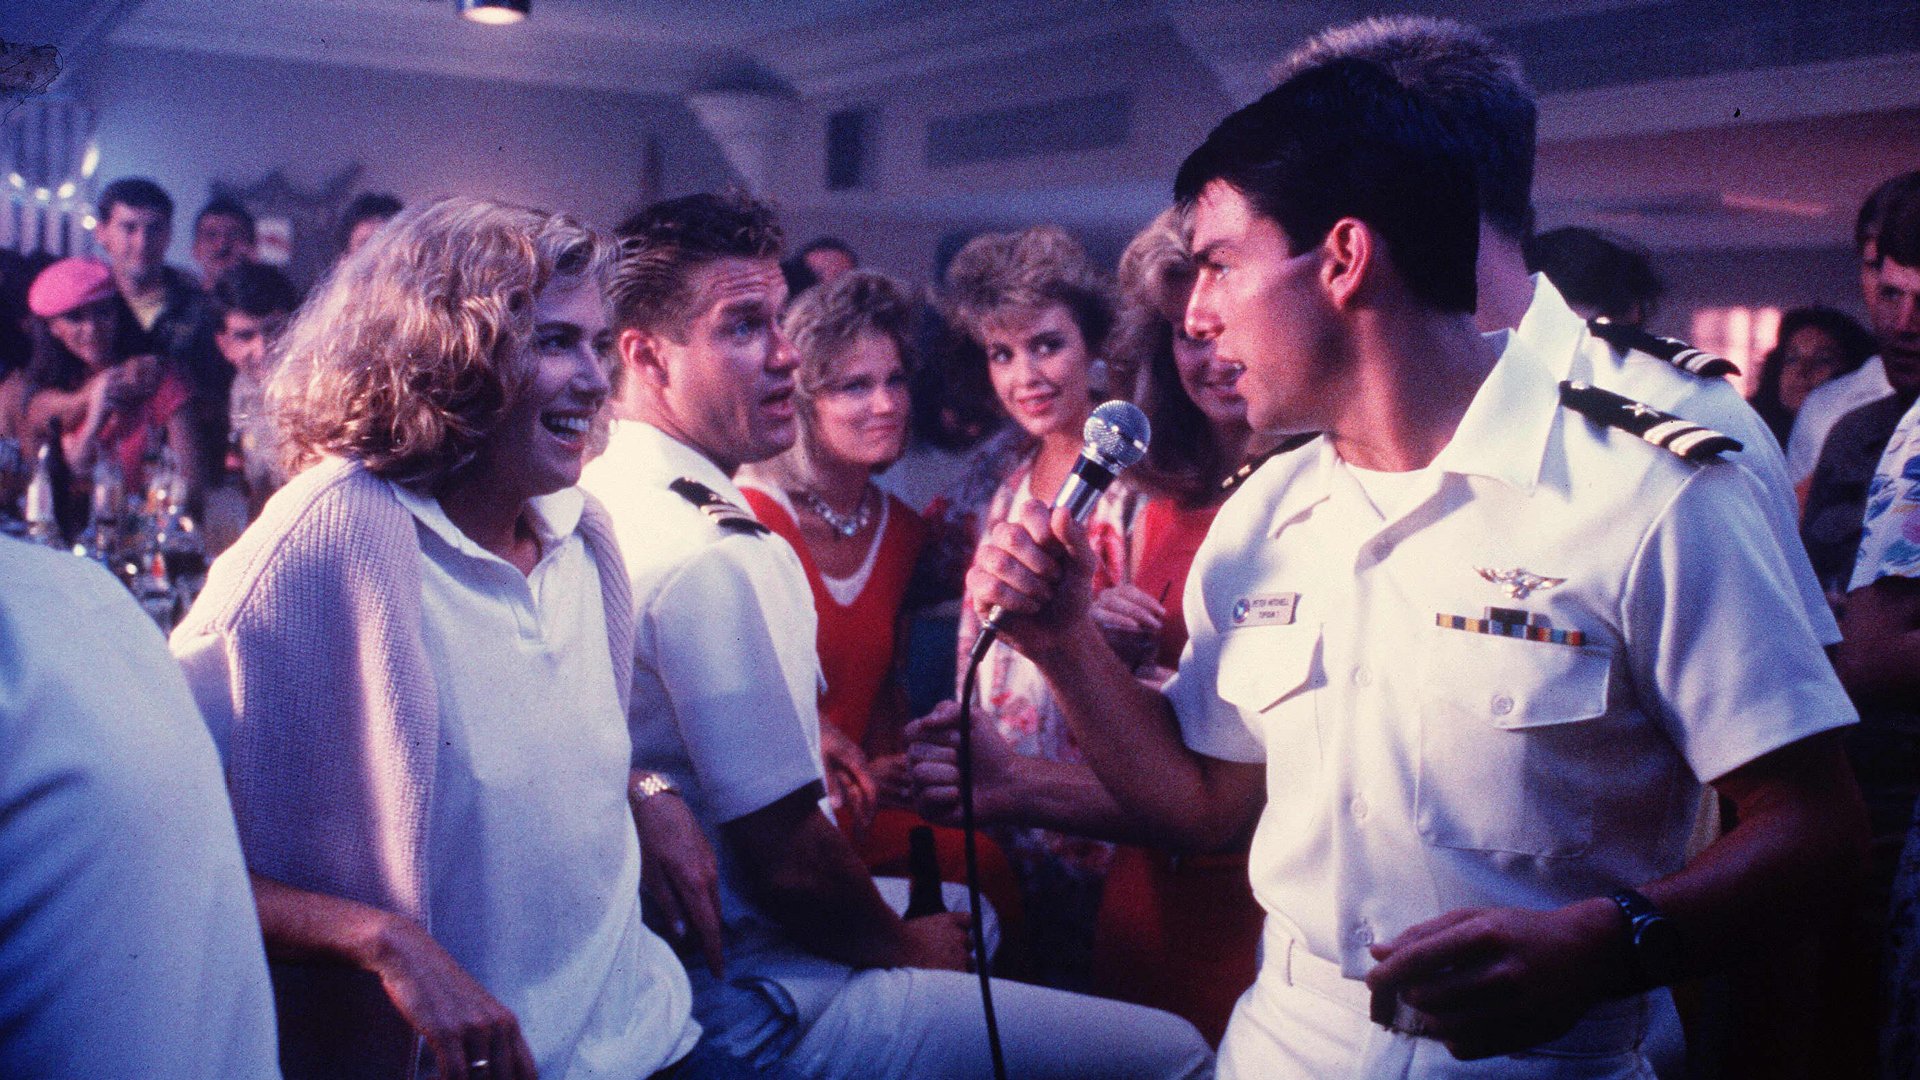 A man in navy uniform sings to a woman in a bar surrounded by people.